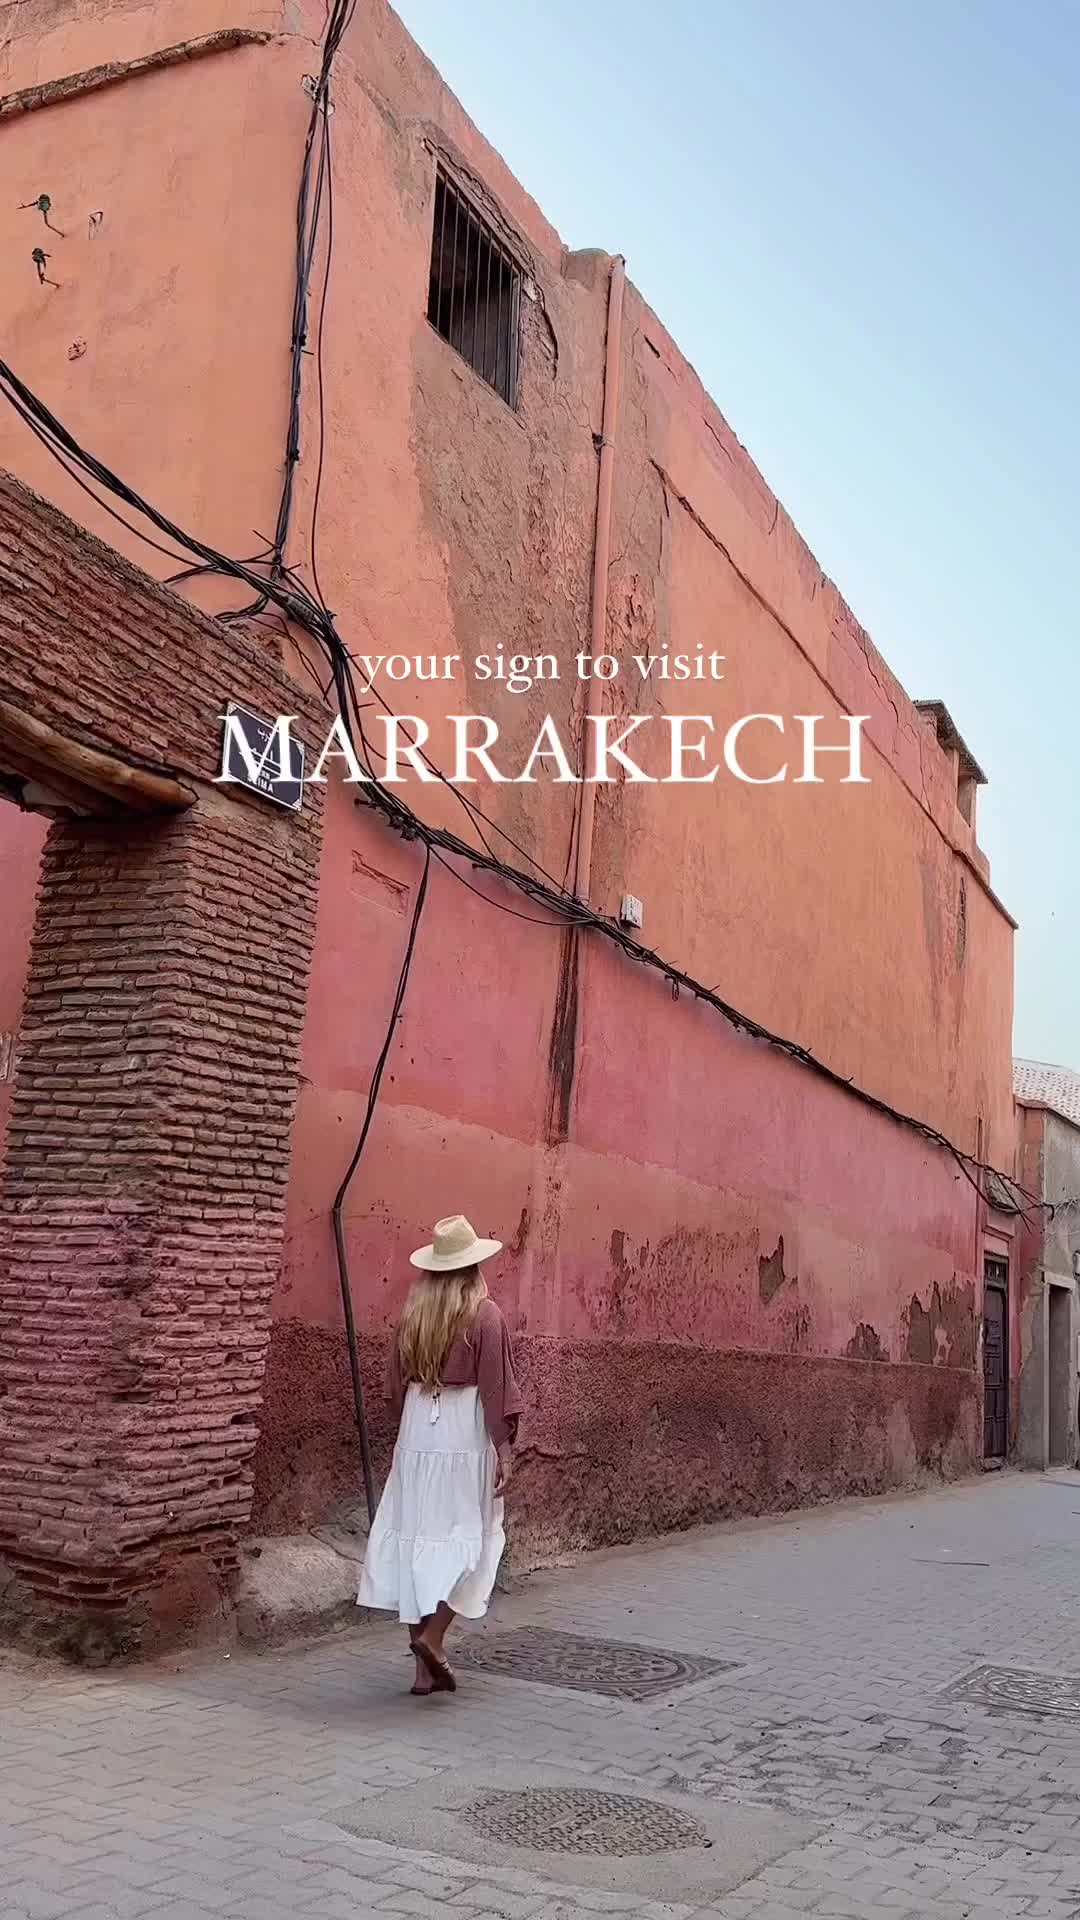 Marrakech Bucket List: Top Things to Do in Morocco